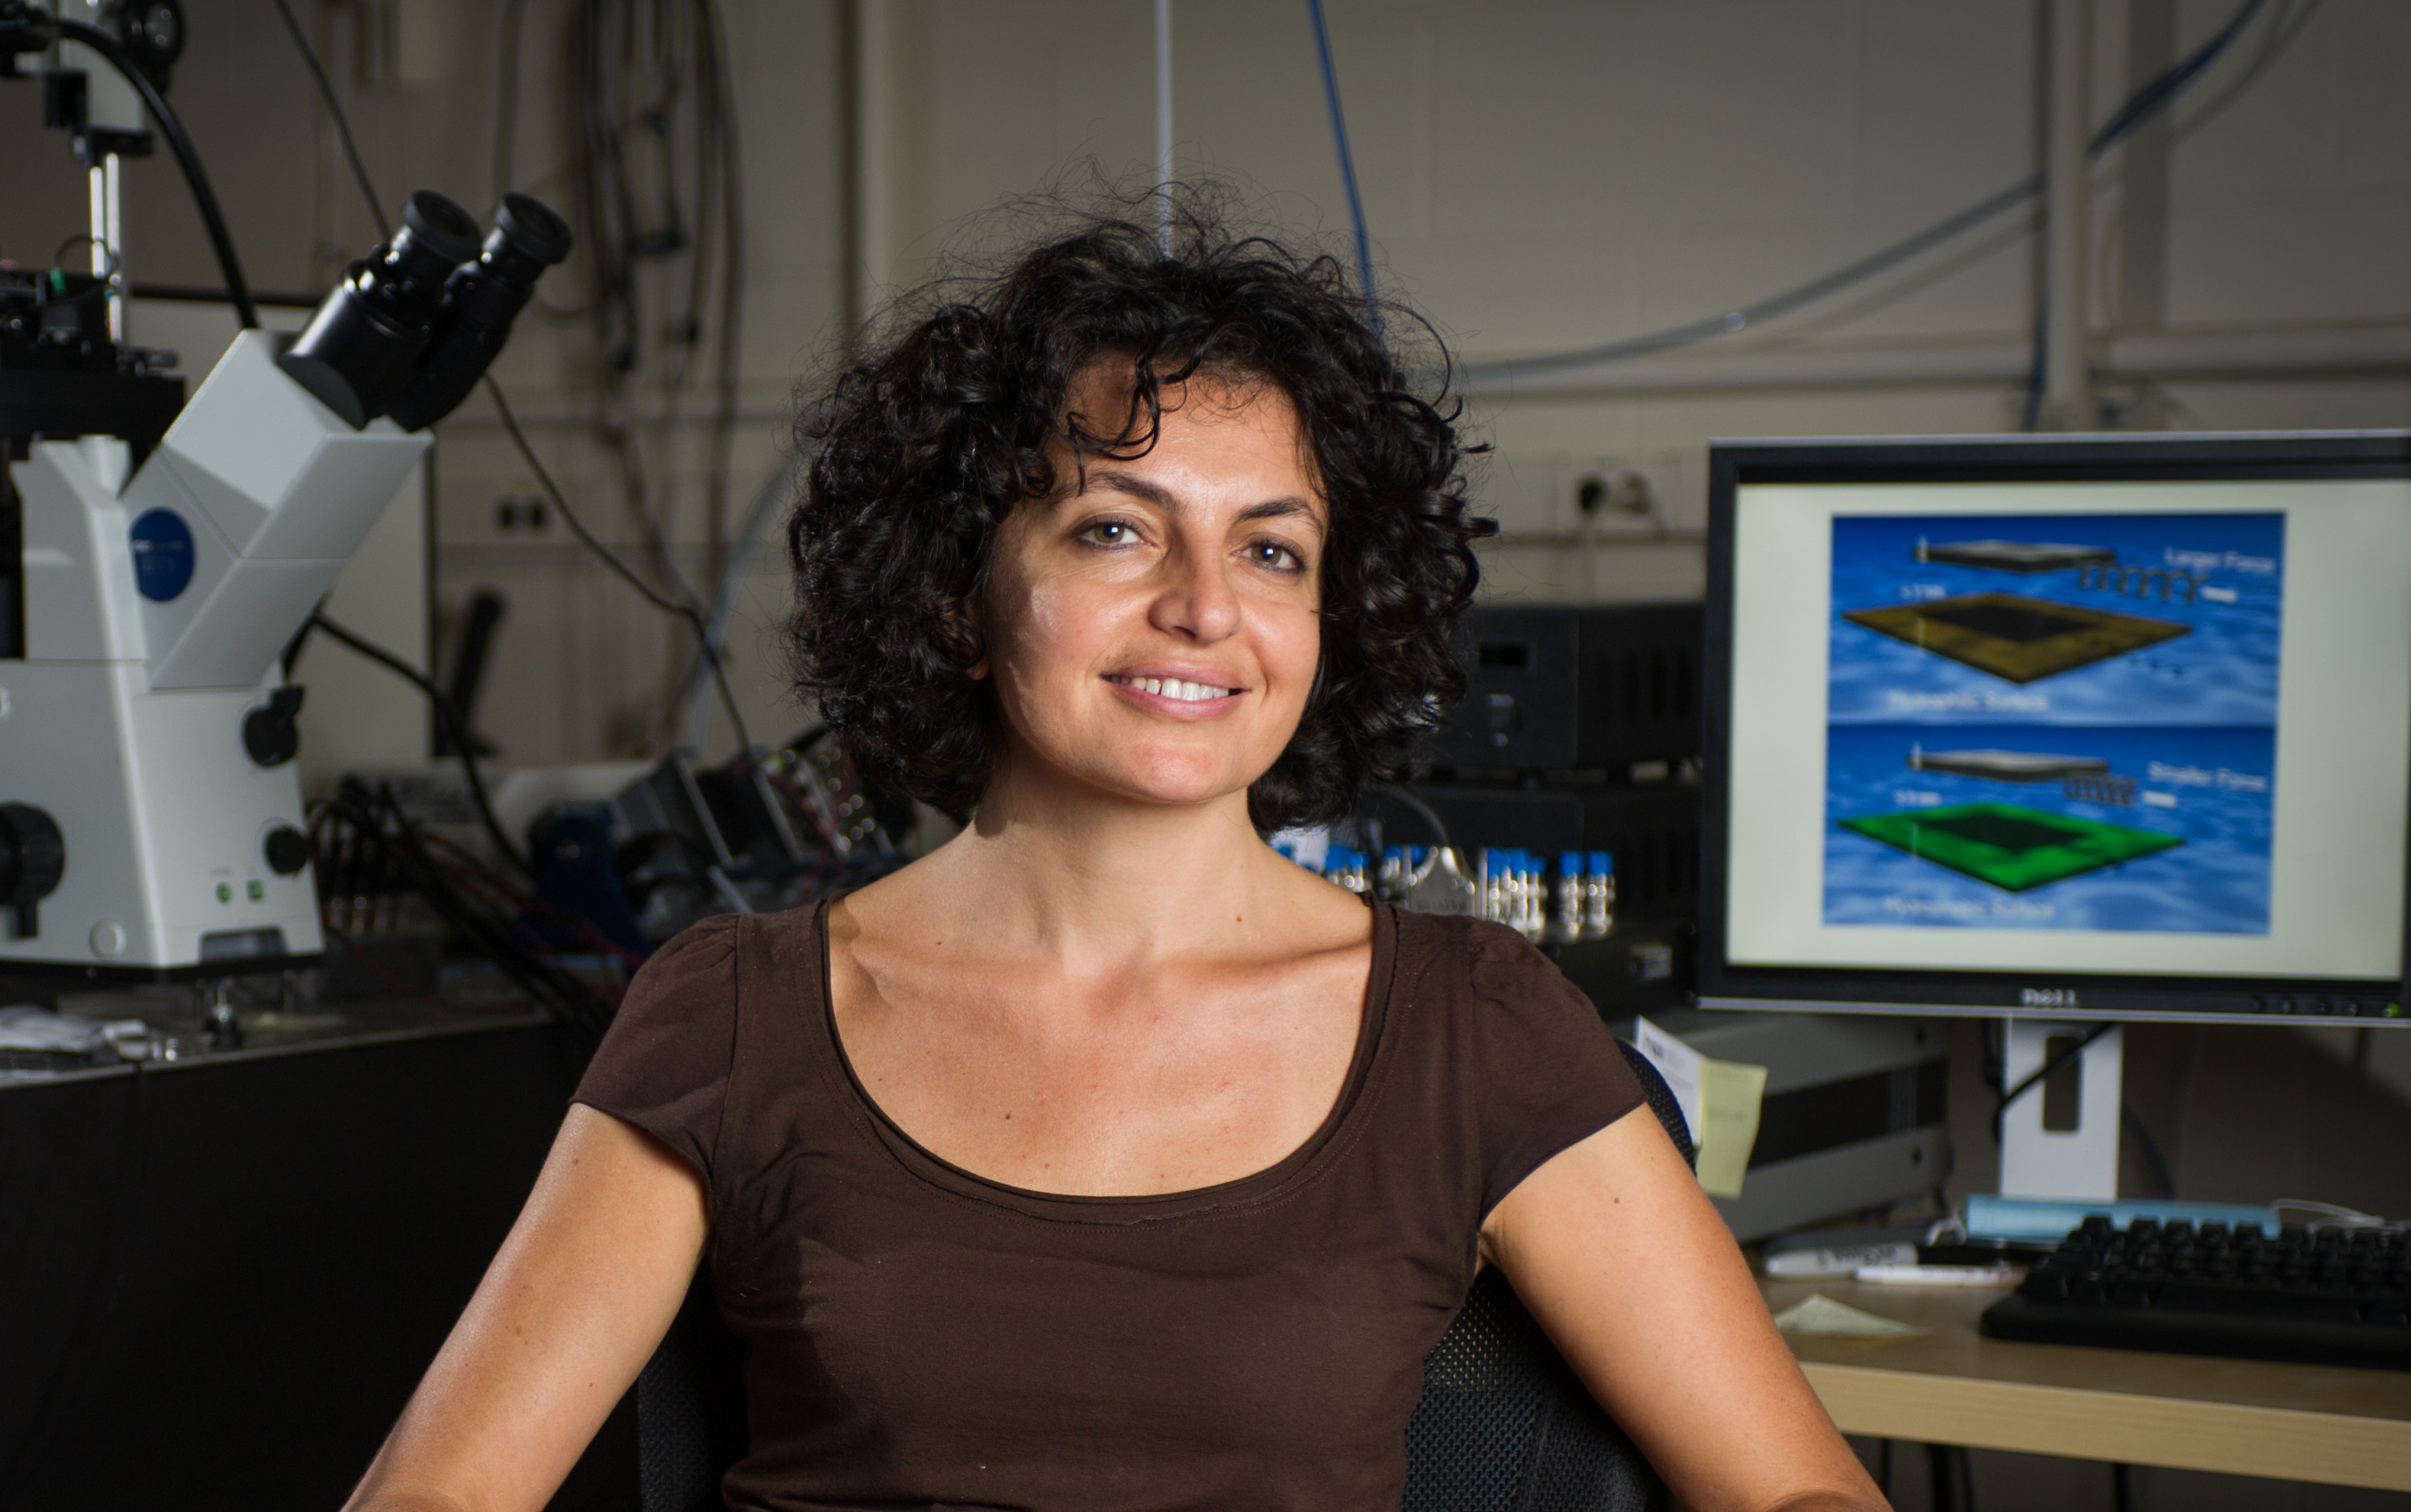 Georgia Tech School of Physics associate professor Elisa Riedo poses with instrumentation used to study how the properties of confining materials affect the effective viscosity of water at nanometer size scales. (Georgia Tech Photo: Rob Felt)